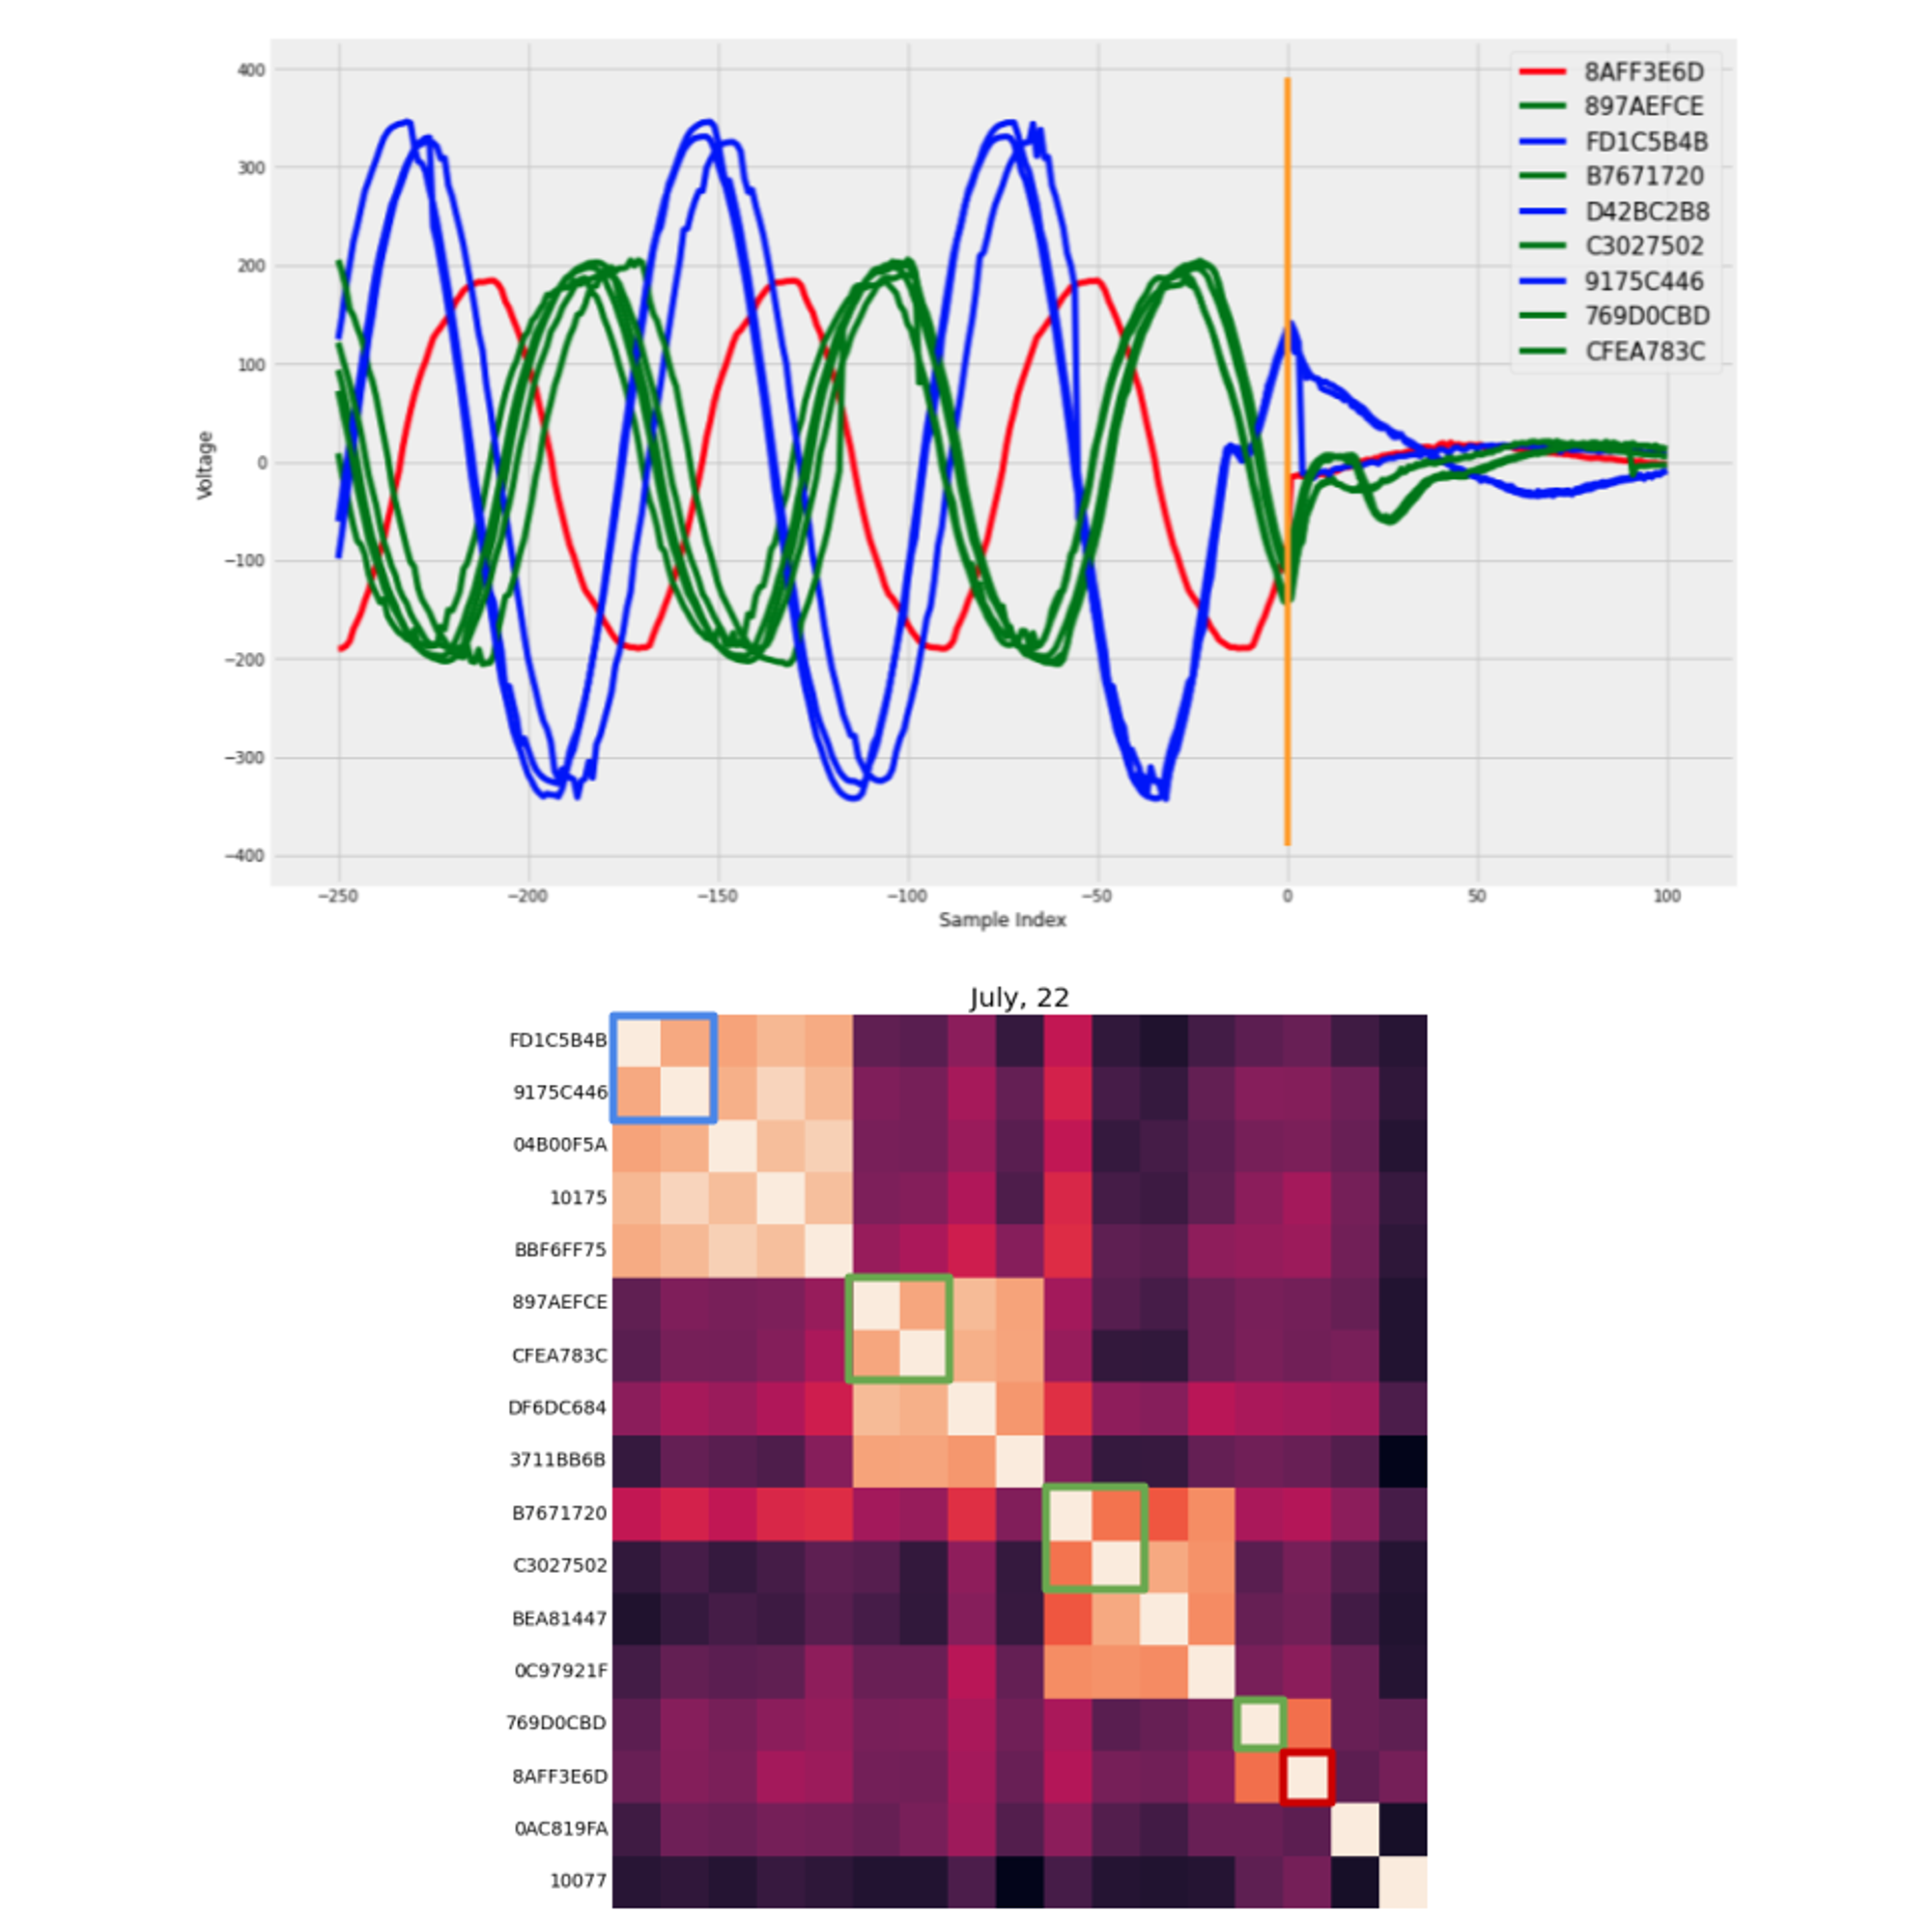 Figure 12. Point-on-wave snapshots around the moment of an outage compared with varprox metrics for the same period. The waveform timing has been manually refined using the outage moment as a reference. Waveforms have then been grouped based on similarity, with groups indicated by color (red, green, and blue). Based on the time separation of peaks, these groups appear to correspond to the three phases. The same sensors have been highlighted in the varprox matrix at bottom. We can see some correspondence in the varprox groupings and the waveform phase groupings.